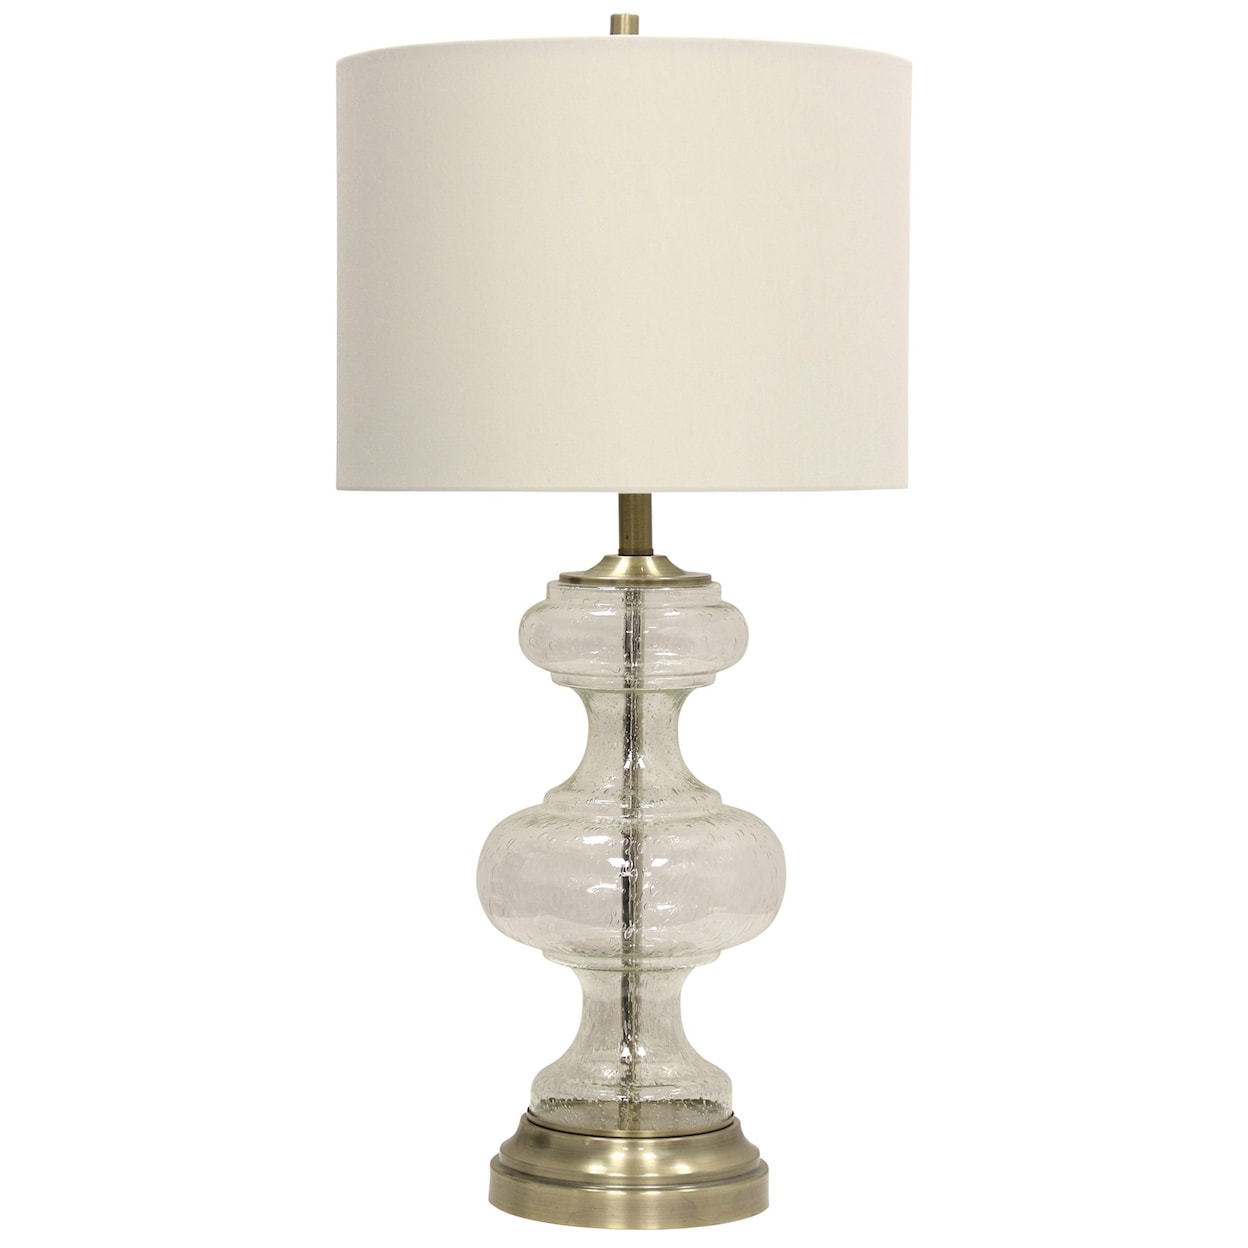 StyleCraft Lamps Glass And Metal Transitional Table Lamp